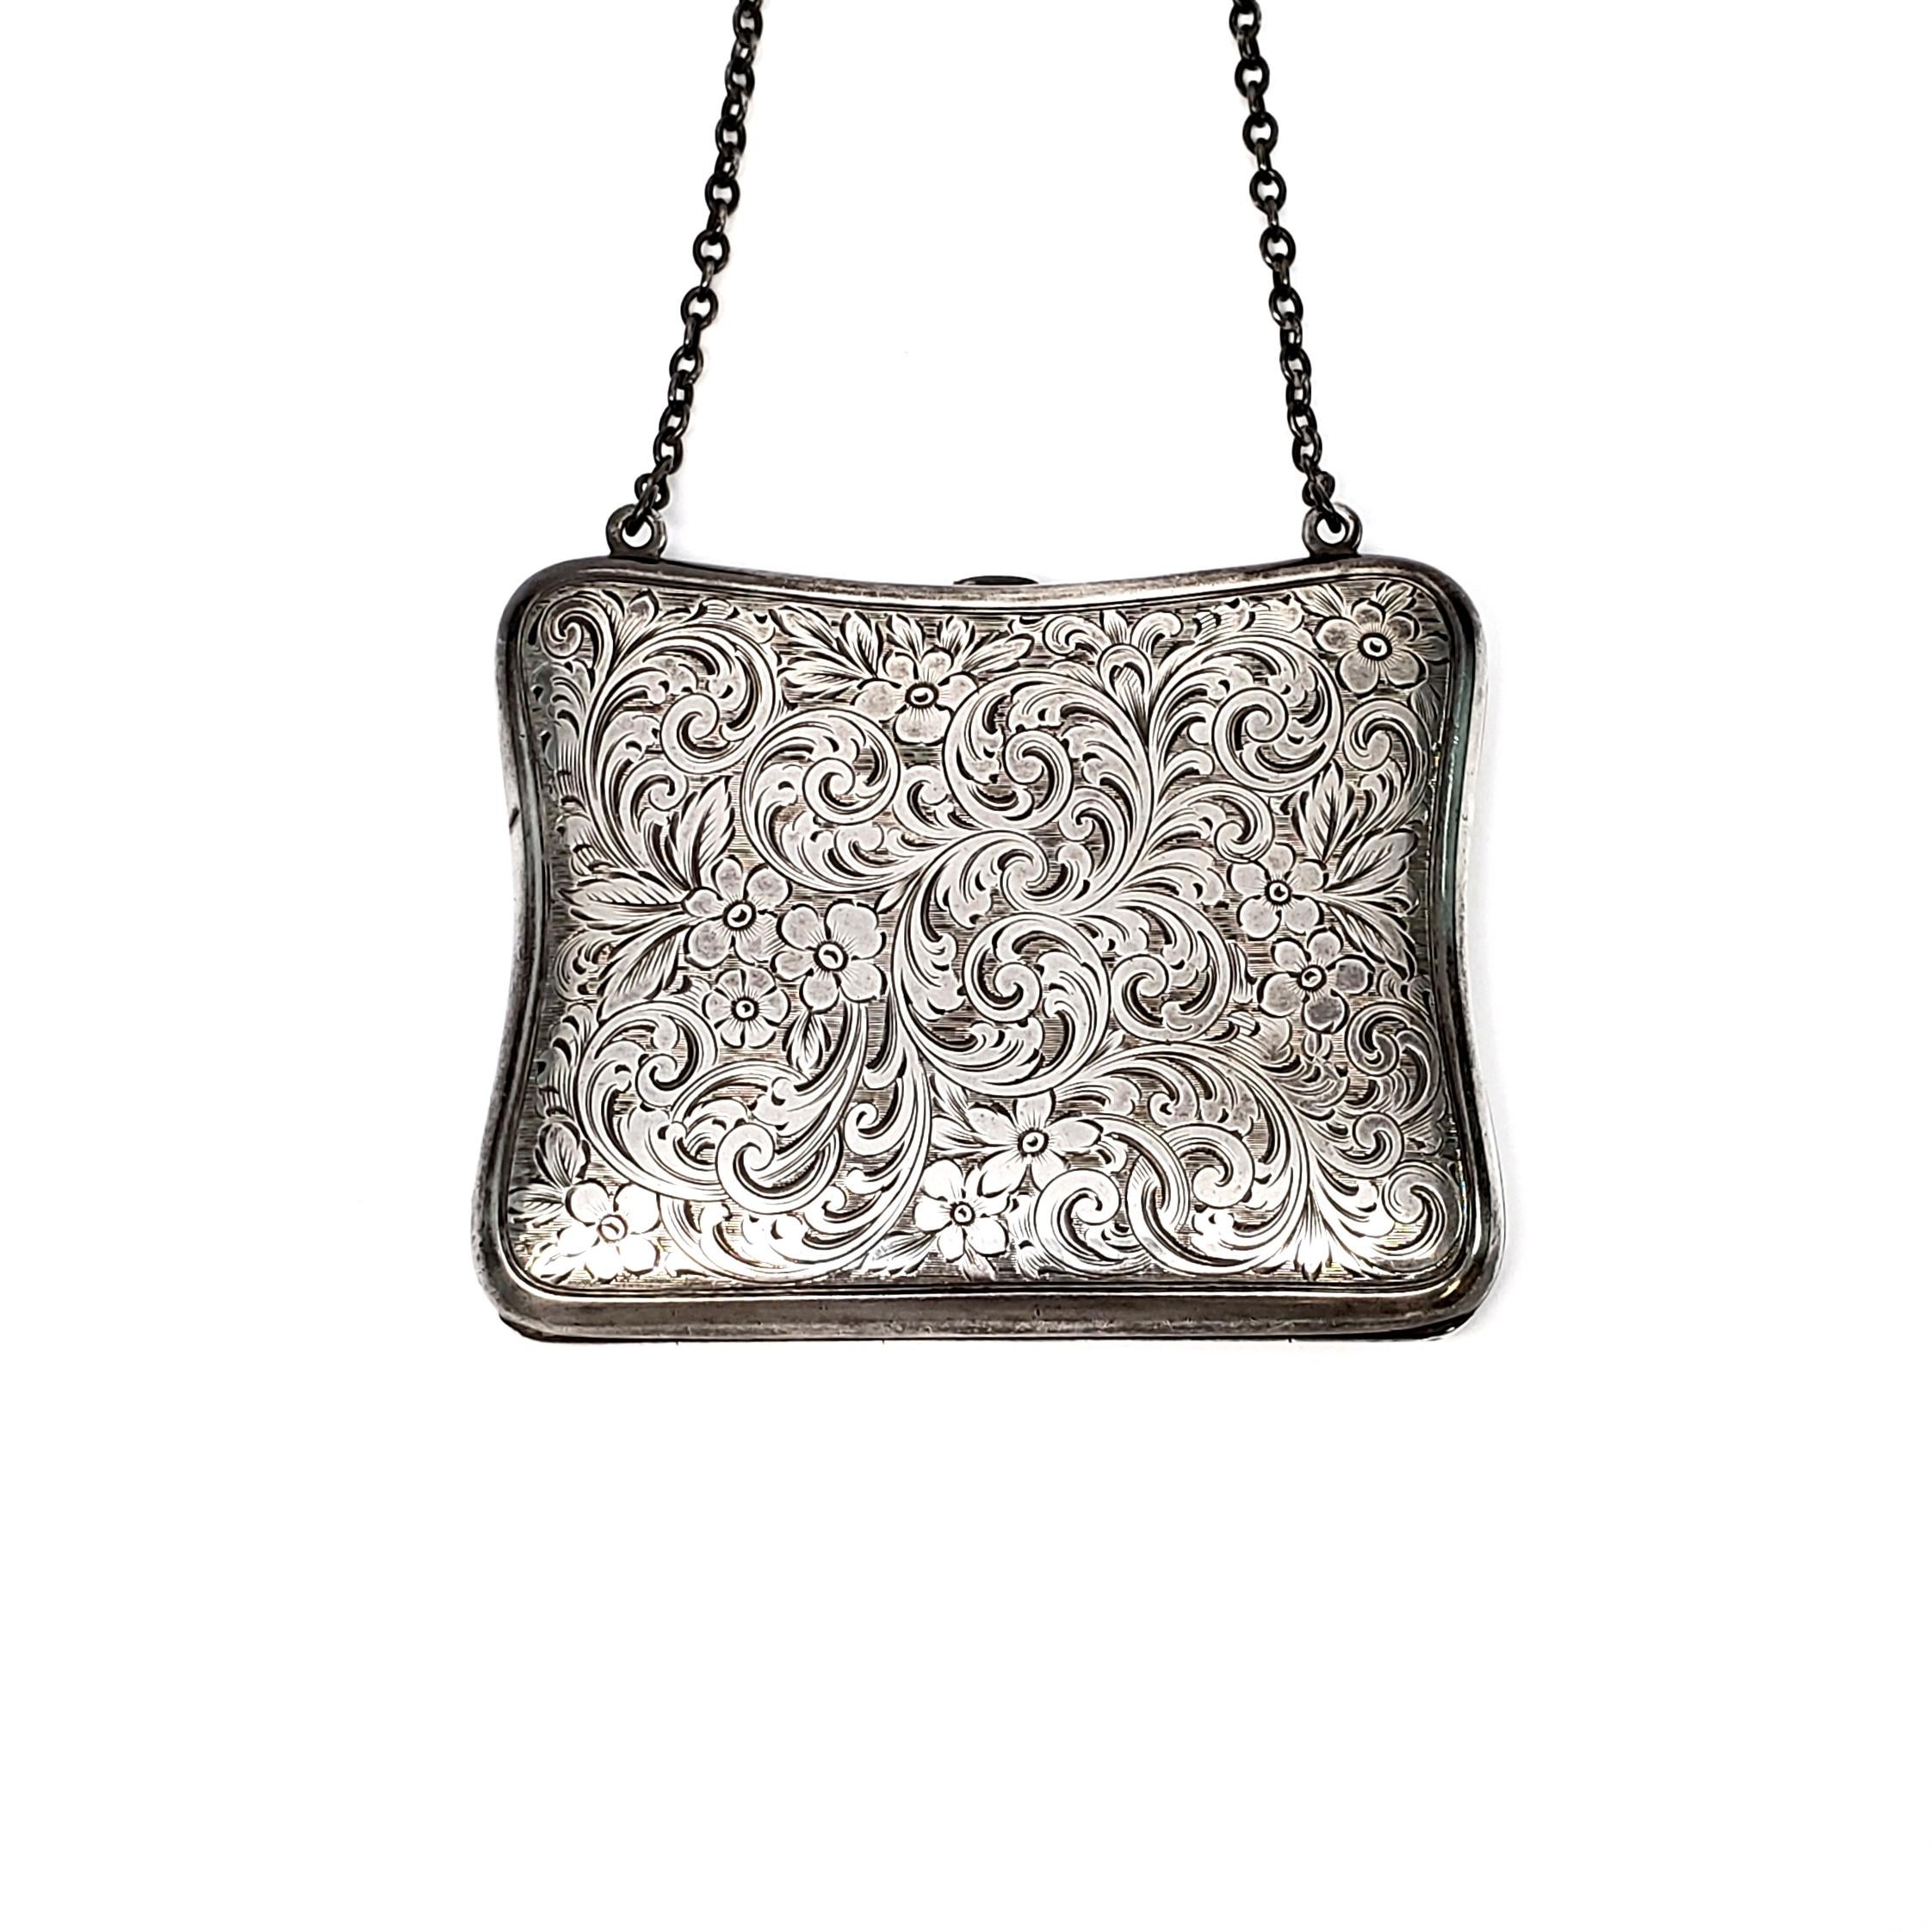 Antique sterling silver coin purse by R. Blankinton & Co.

Floral and flourish engraved design with AHC monogram on one side. Round link chain strap and interior pockets on each side. Circa 1900-1909.

Size: 3 5/8